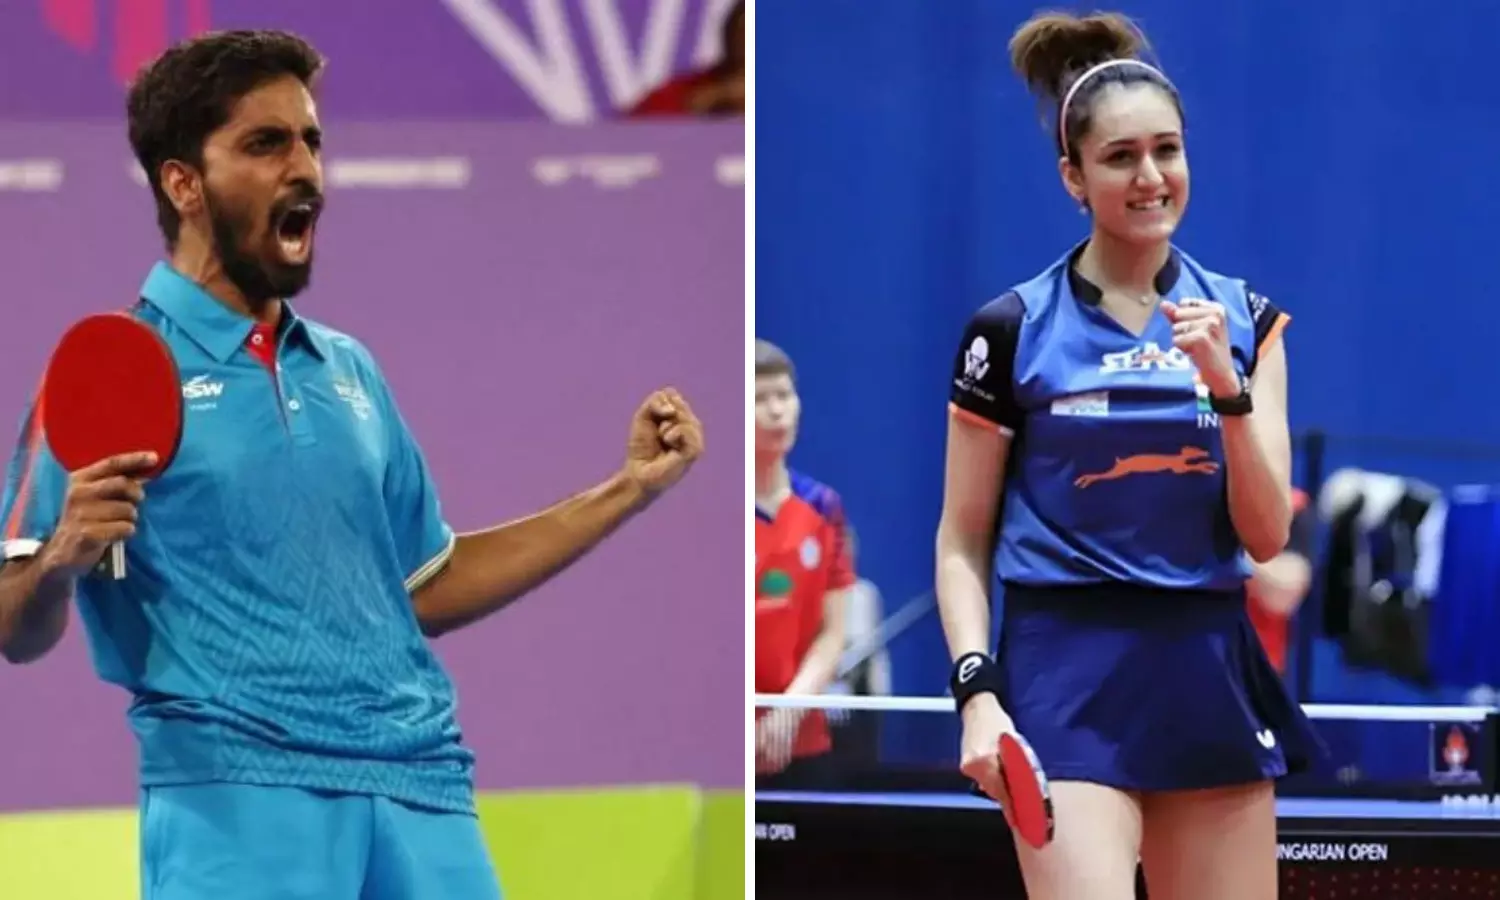 World Table Tennis Team Cships Indian men, women in pre-quarters — Preview, Schedule, Where to Watch, LIVE streaming